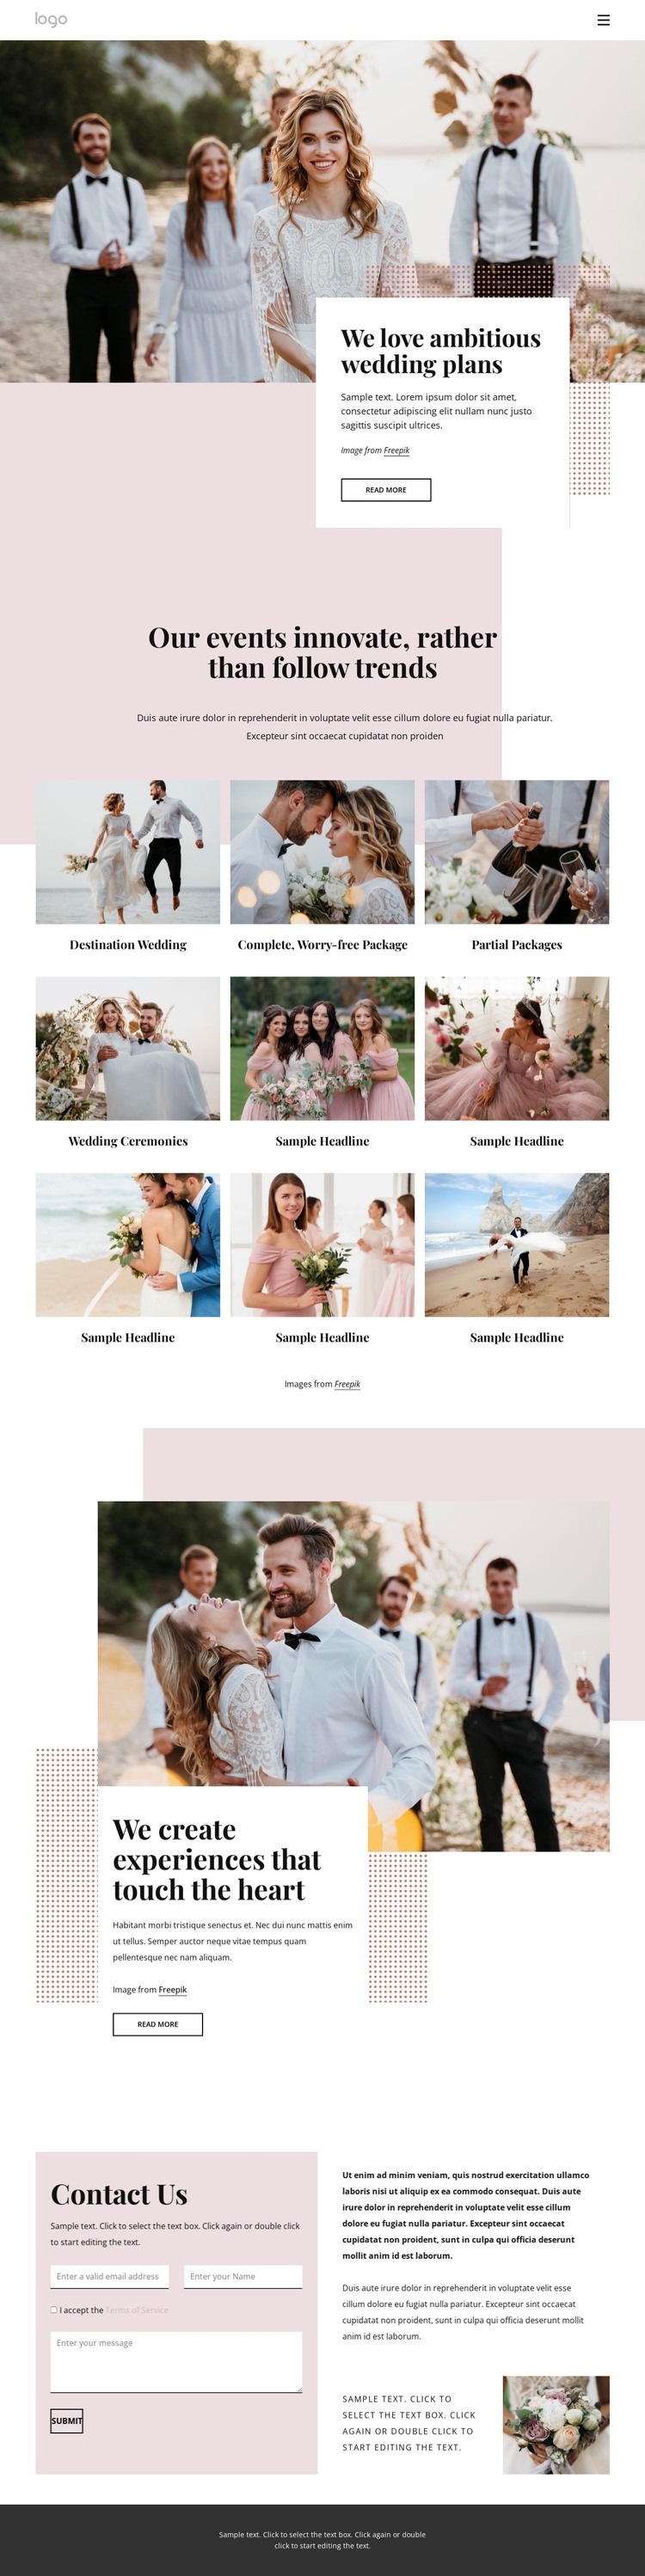 We love ambitious wedding plans HTML Template